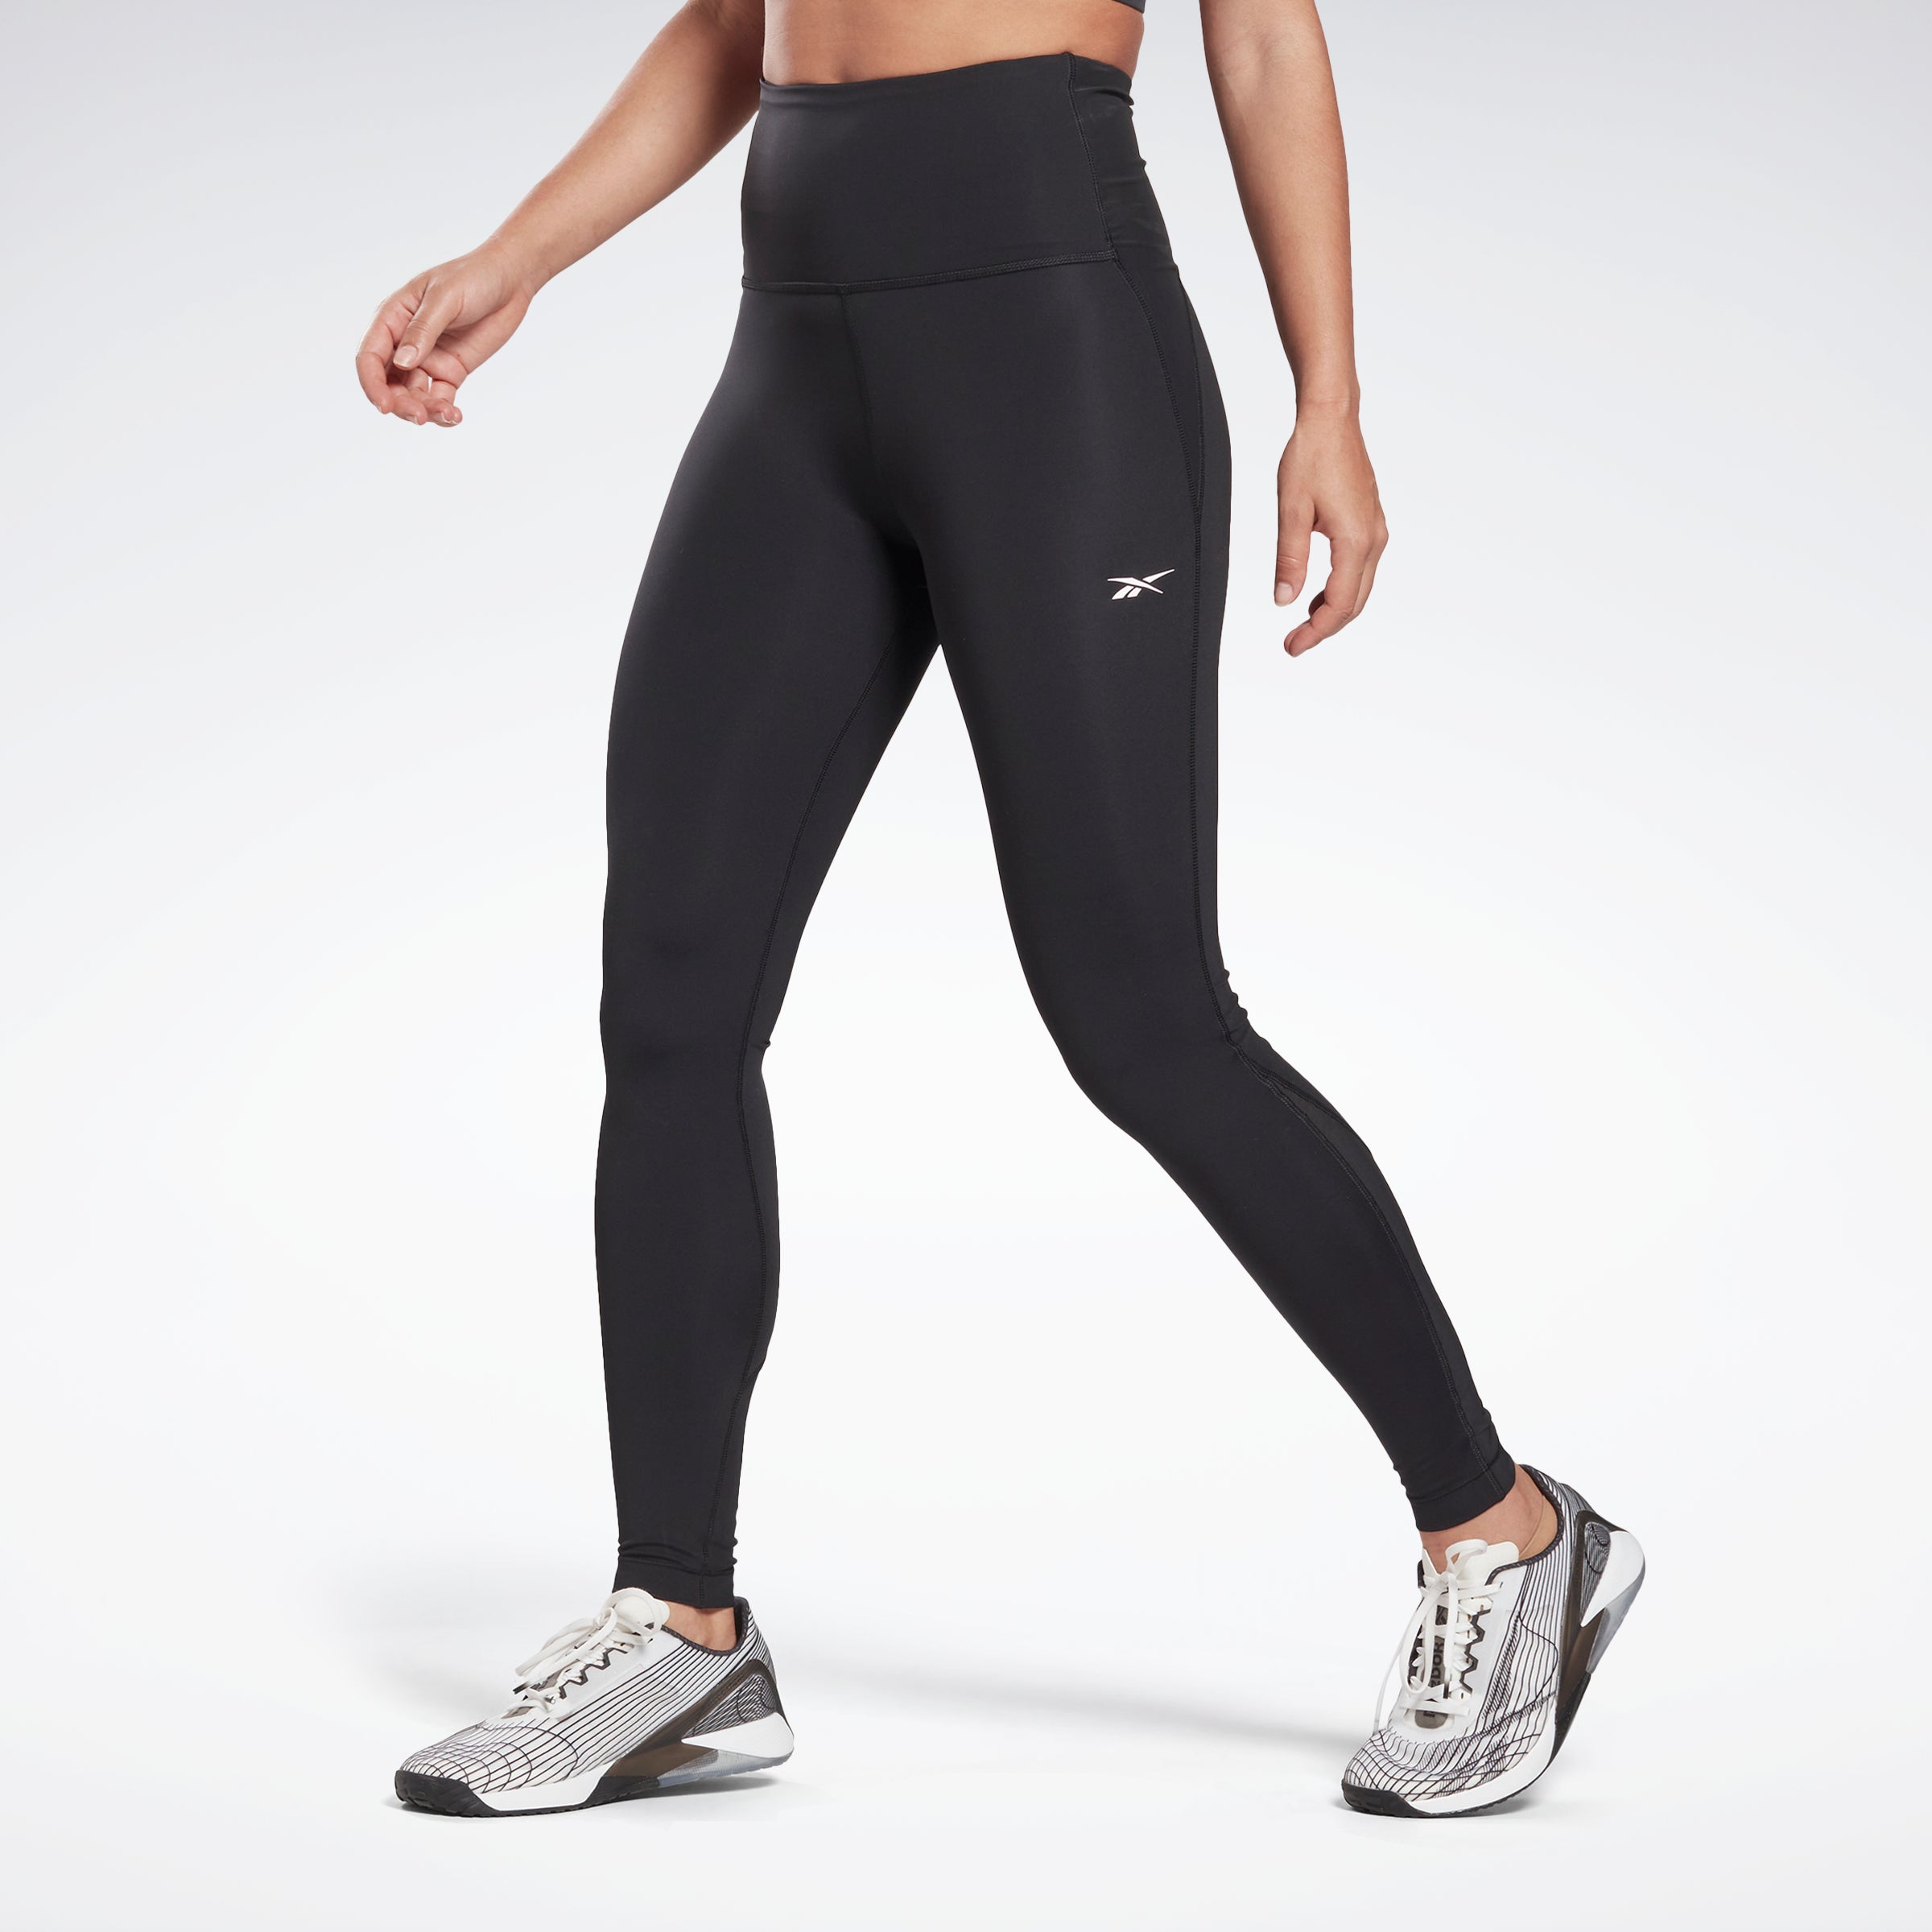 Stretchy leggings – Fit Lux